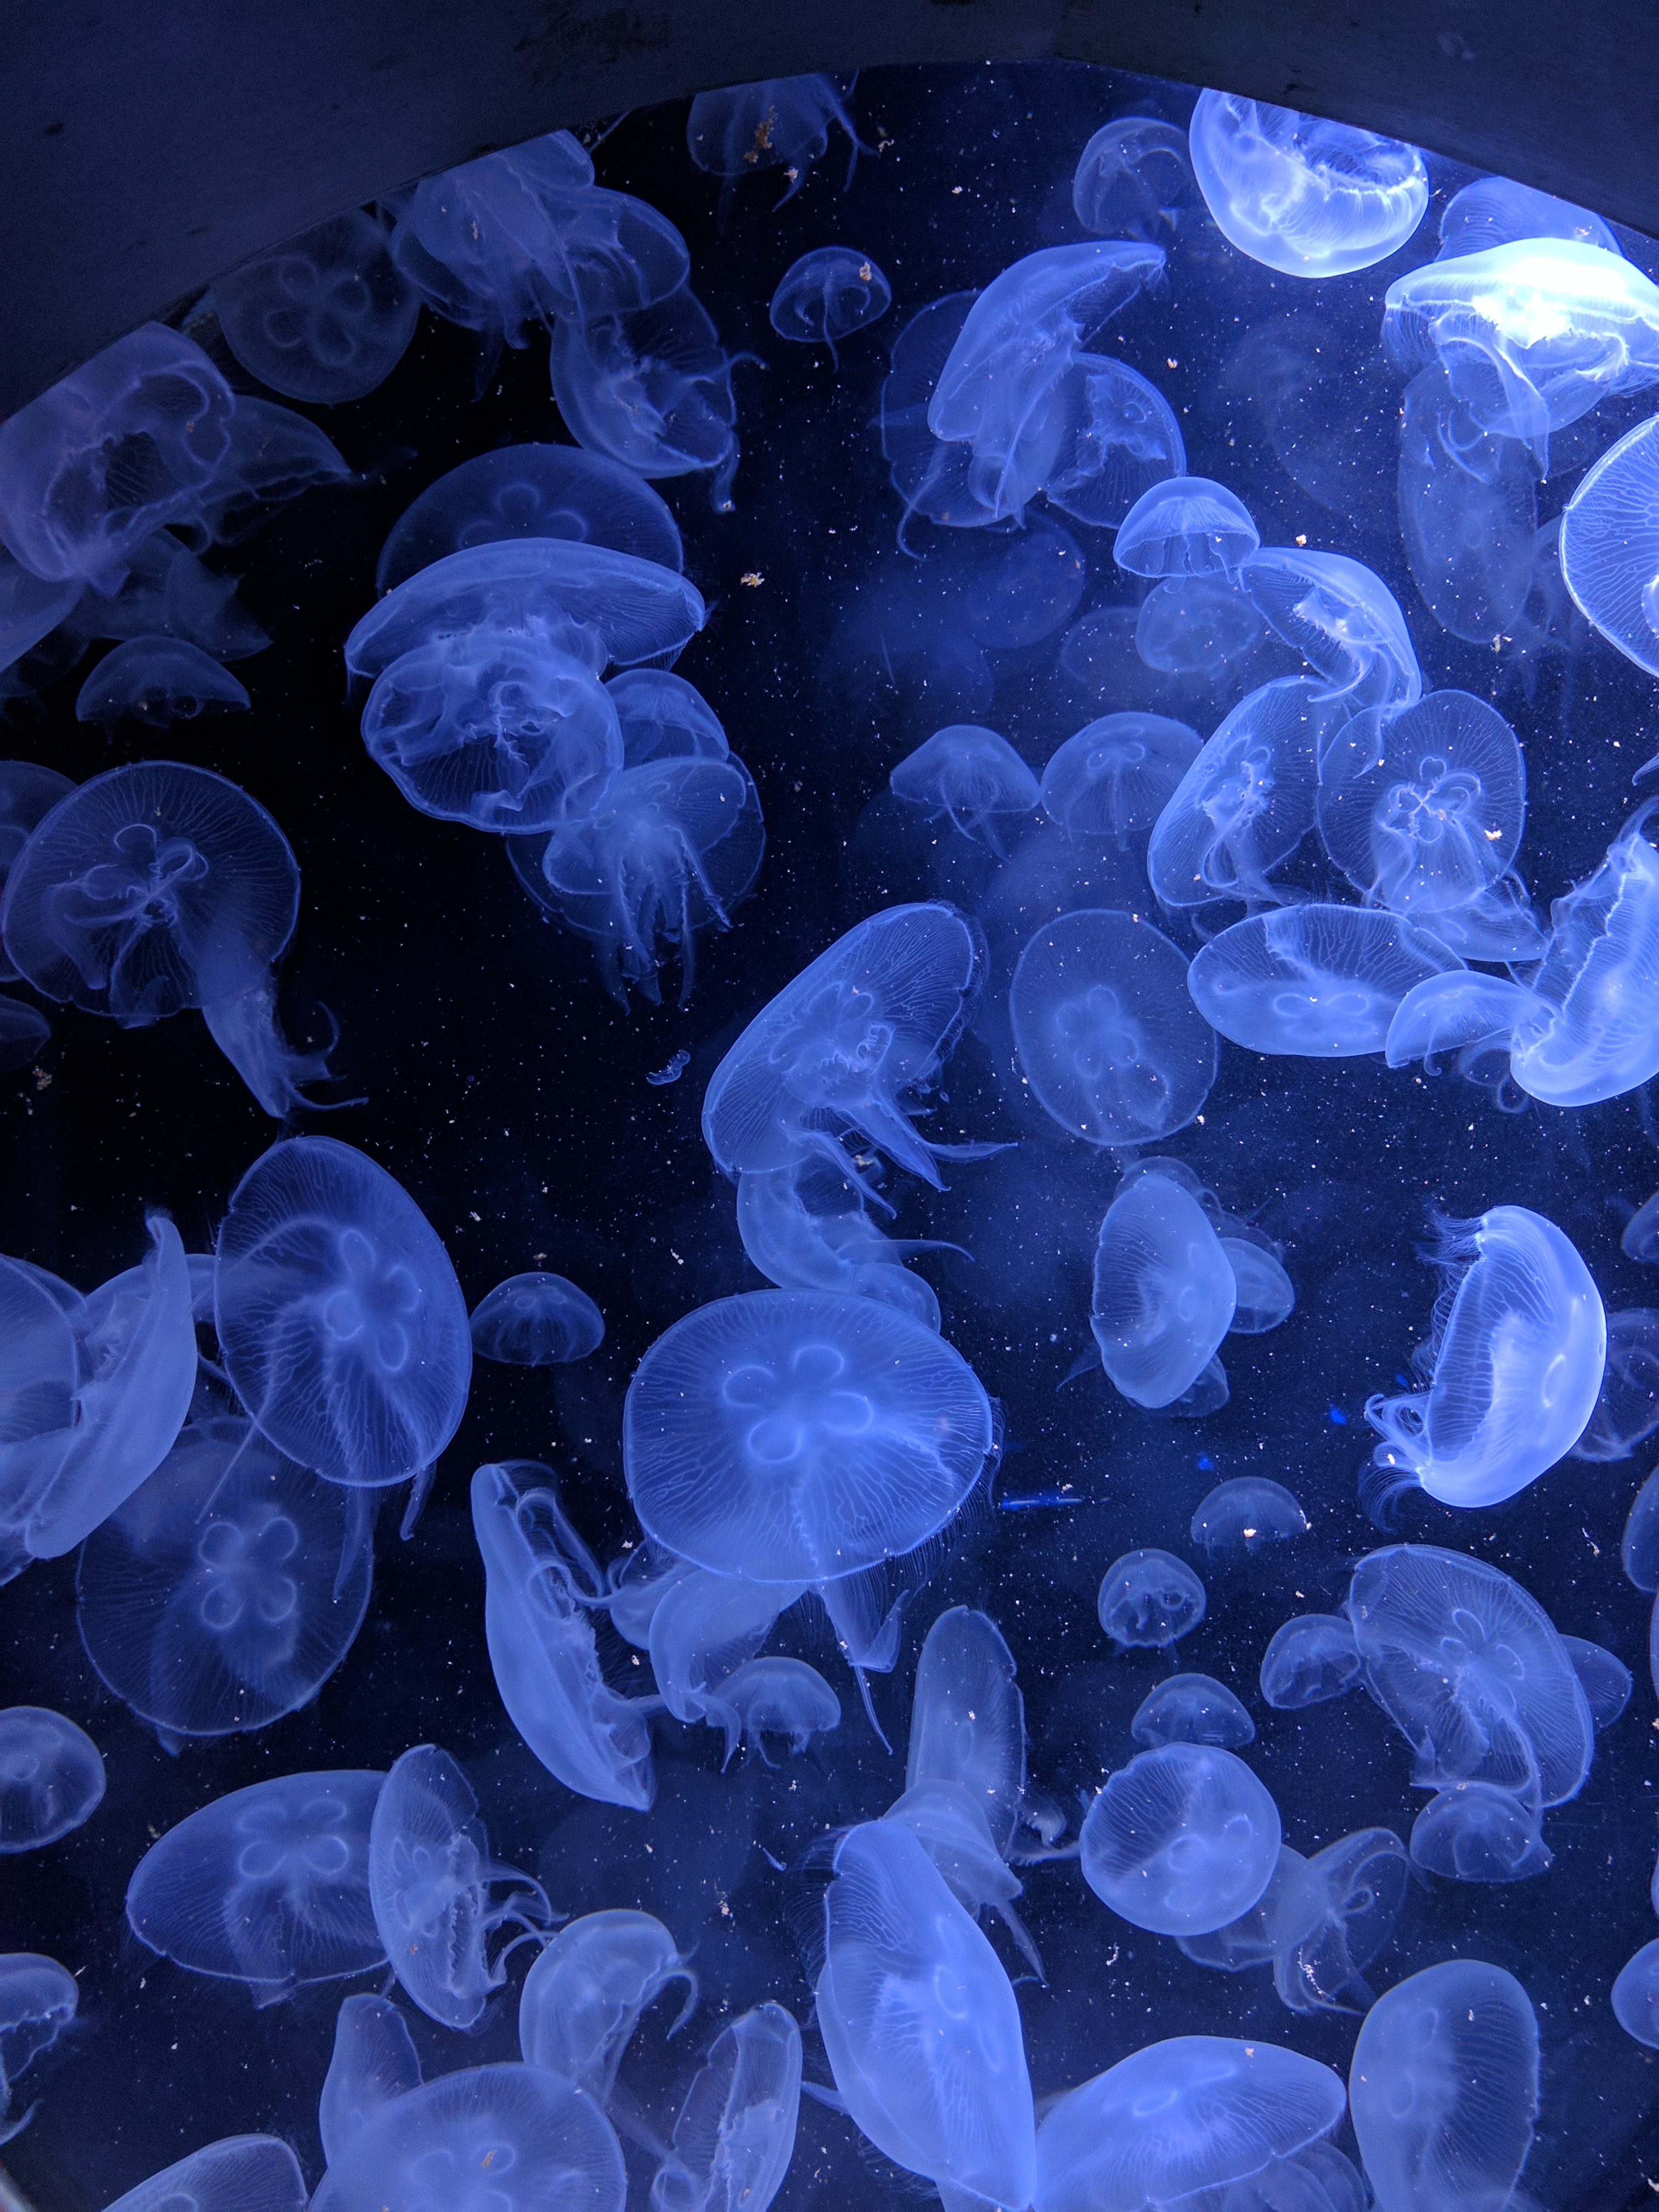 98807 download wallpaper animals, jellyfish, swimming, underwater world, depth screensavers and pictures for free